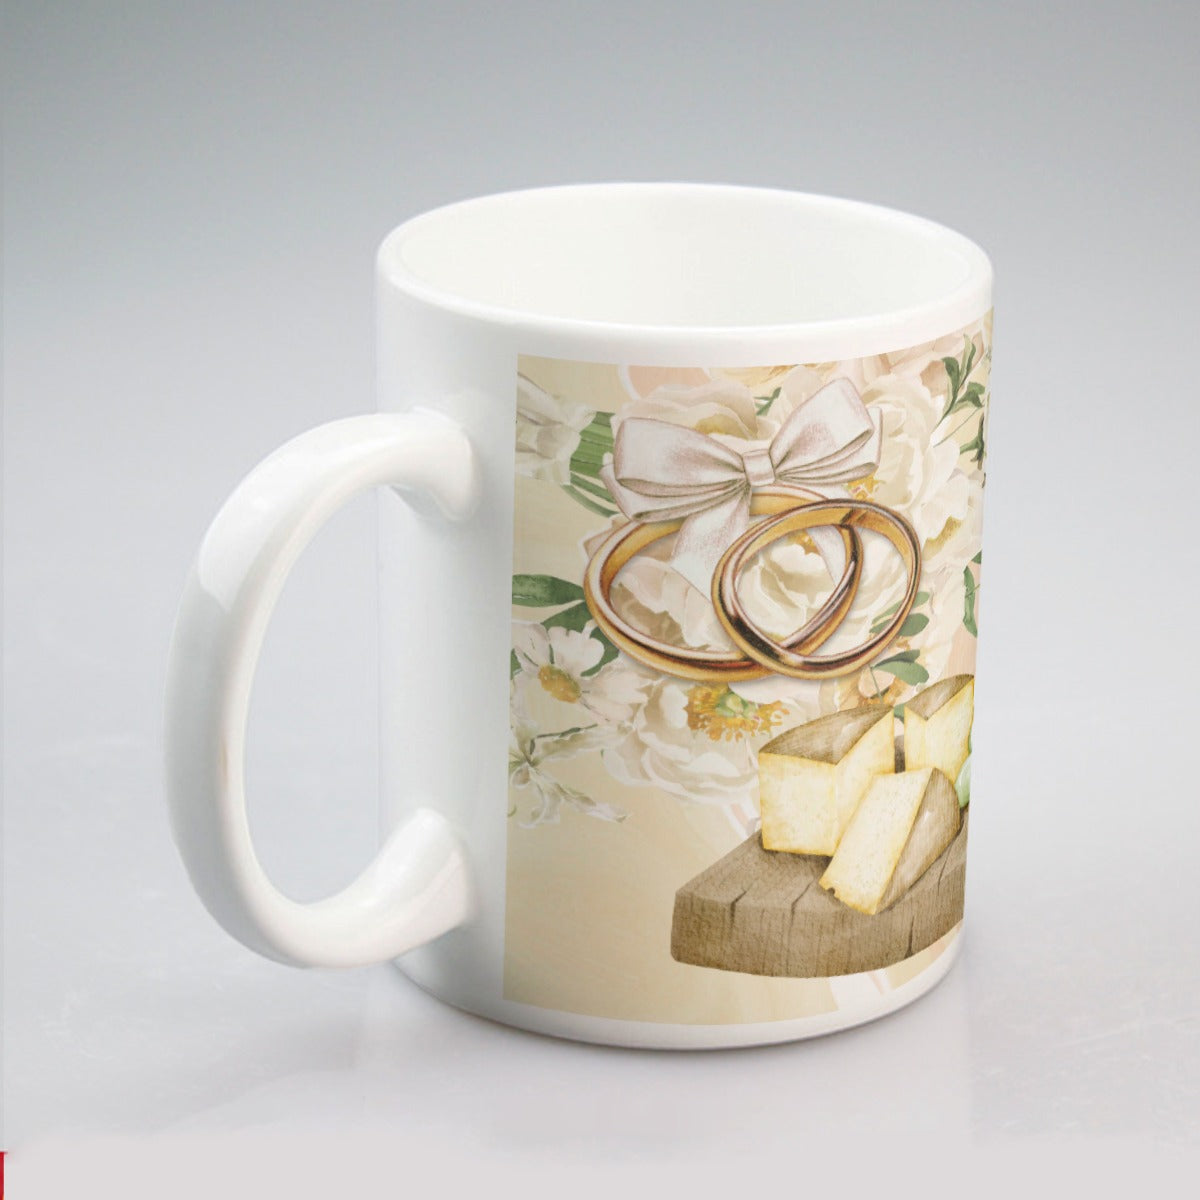 All-over print mug The Lovely Bride, Wedding, High Heels, Wedding Dress, Bouquet, White, Rings, Cheese Board, White Grapes, Champagne, Tie the Knot (Designed by Dunbi)